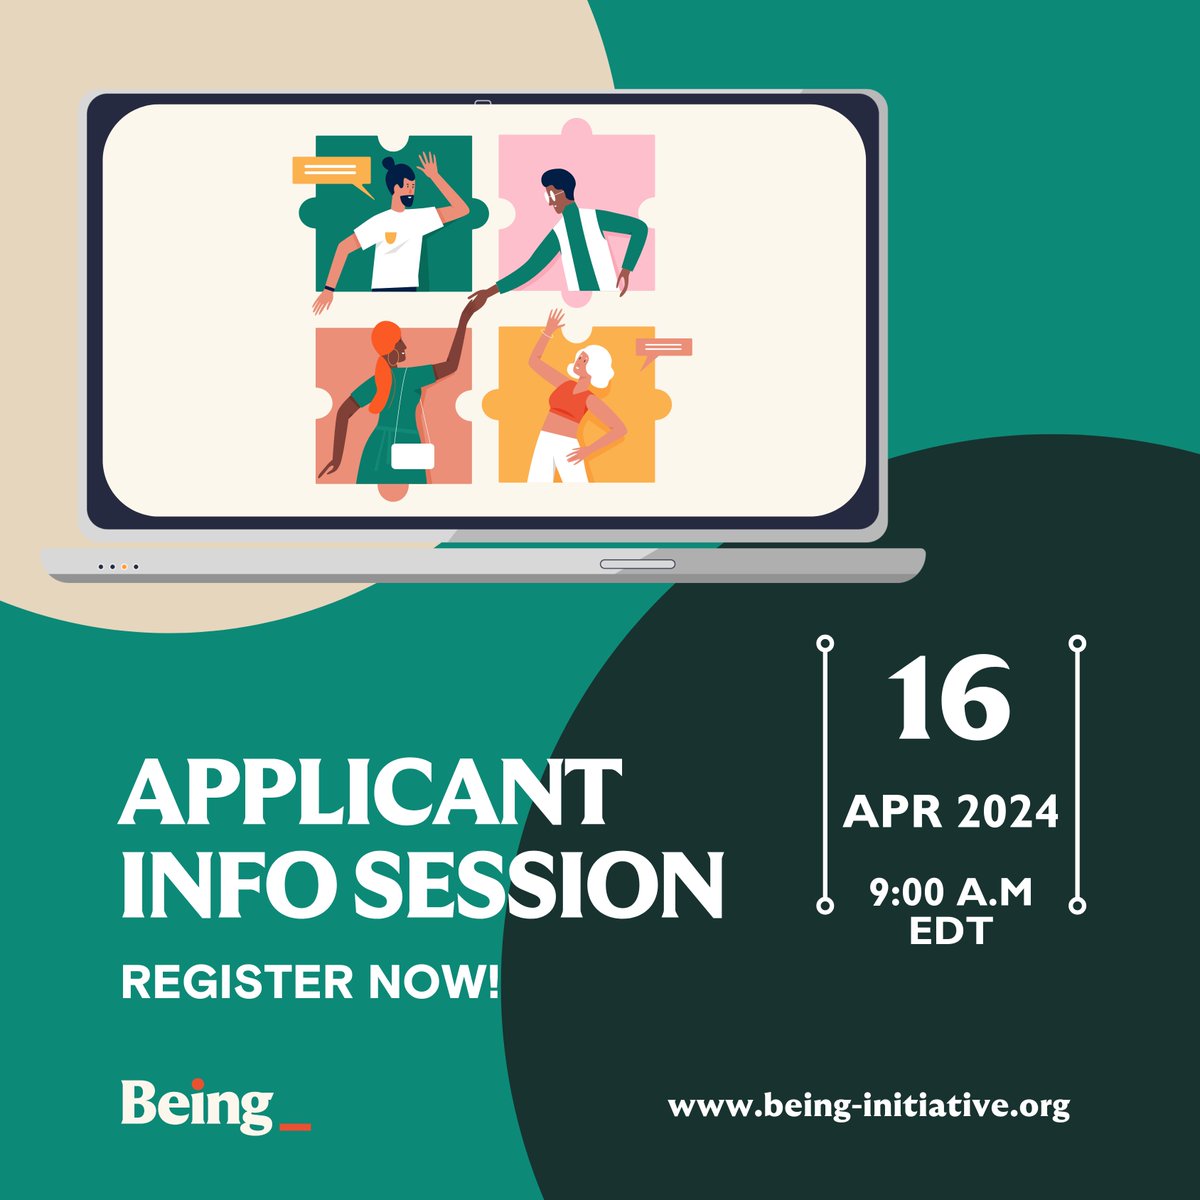 Want to learn more about our #RFP? Join us for our applicant information session on Tuesday, April 16! 📝 Learn more about eligibility, the application process and more! 🗓️Tuesday, April 16 ⏰9:00 AM EDT (1:00 PM GMT) 🔗Register now! 👉 bit.ly/3VJSjBH